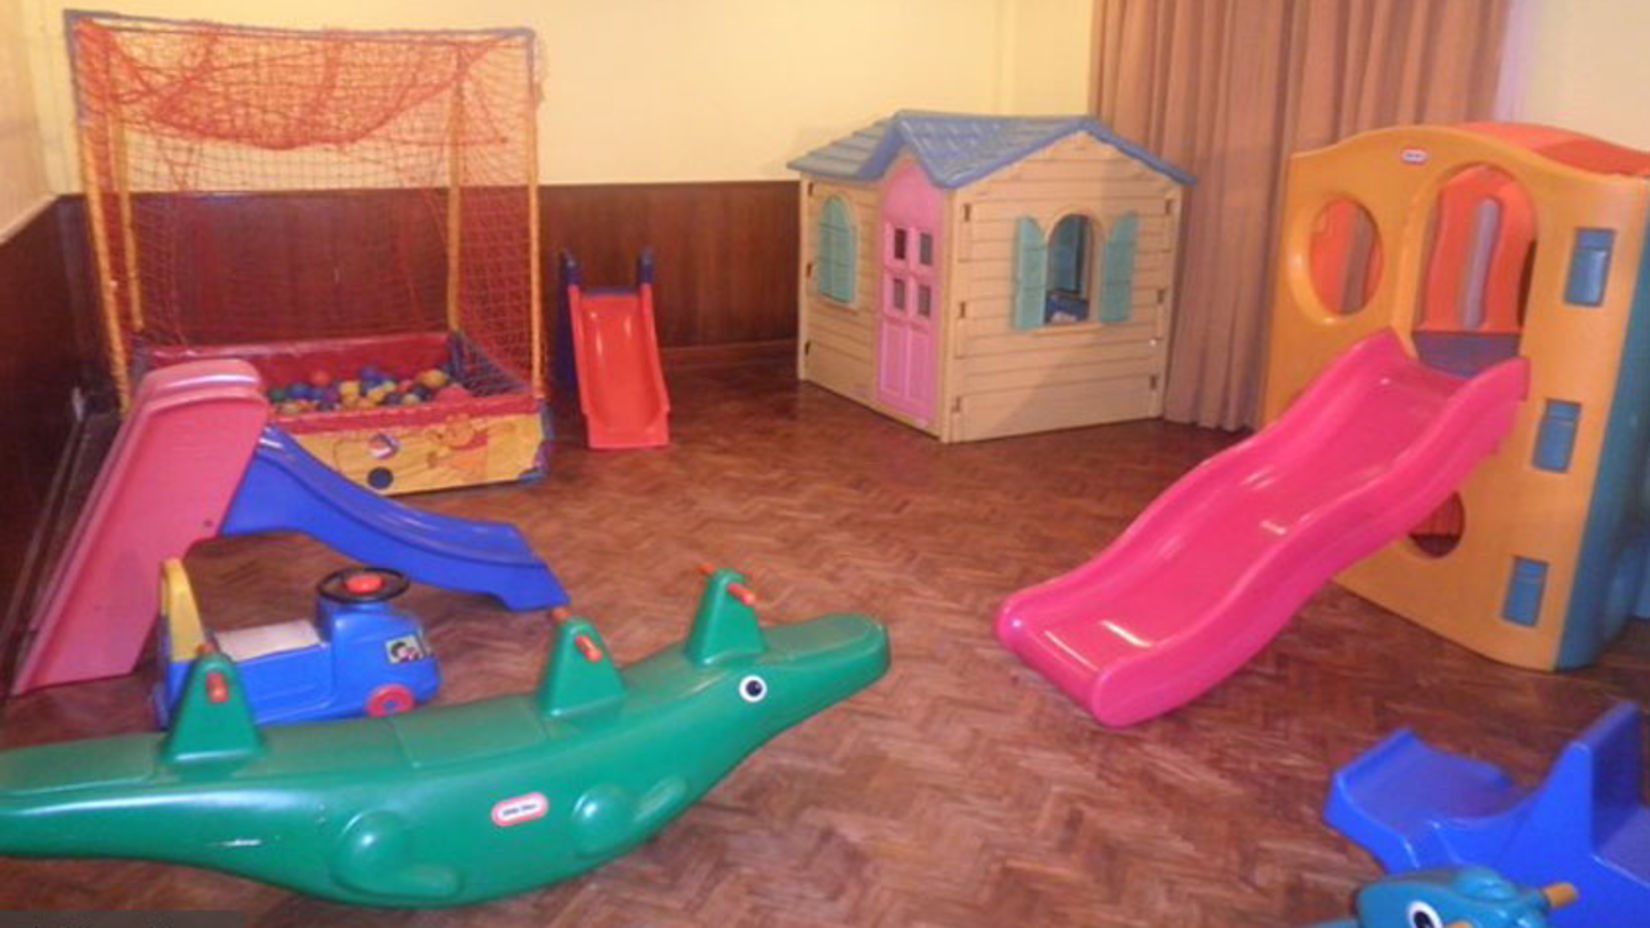 Toddler's room at The Retreat Hotel and Convention Centre, Mad Island